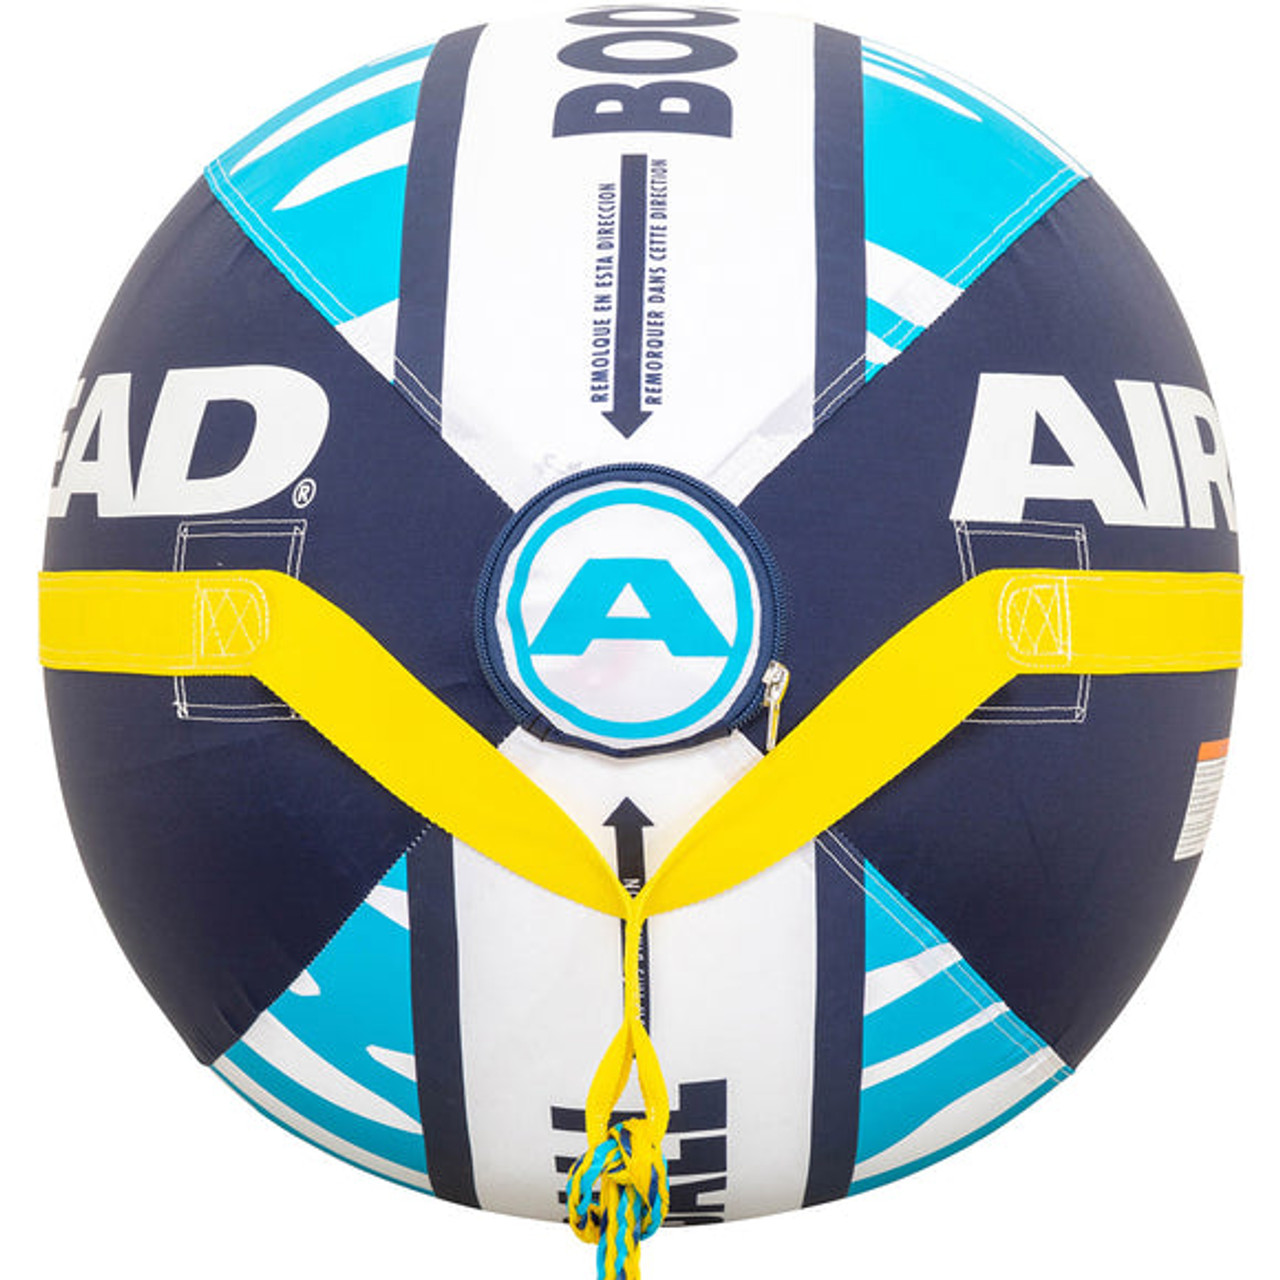 Airhead 4K Booster Ball 4 Rider Towable Tube Rope for Boating - 60 ft.